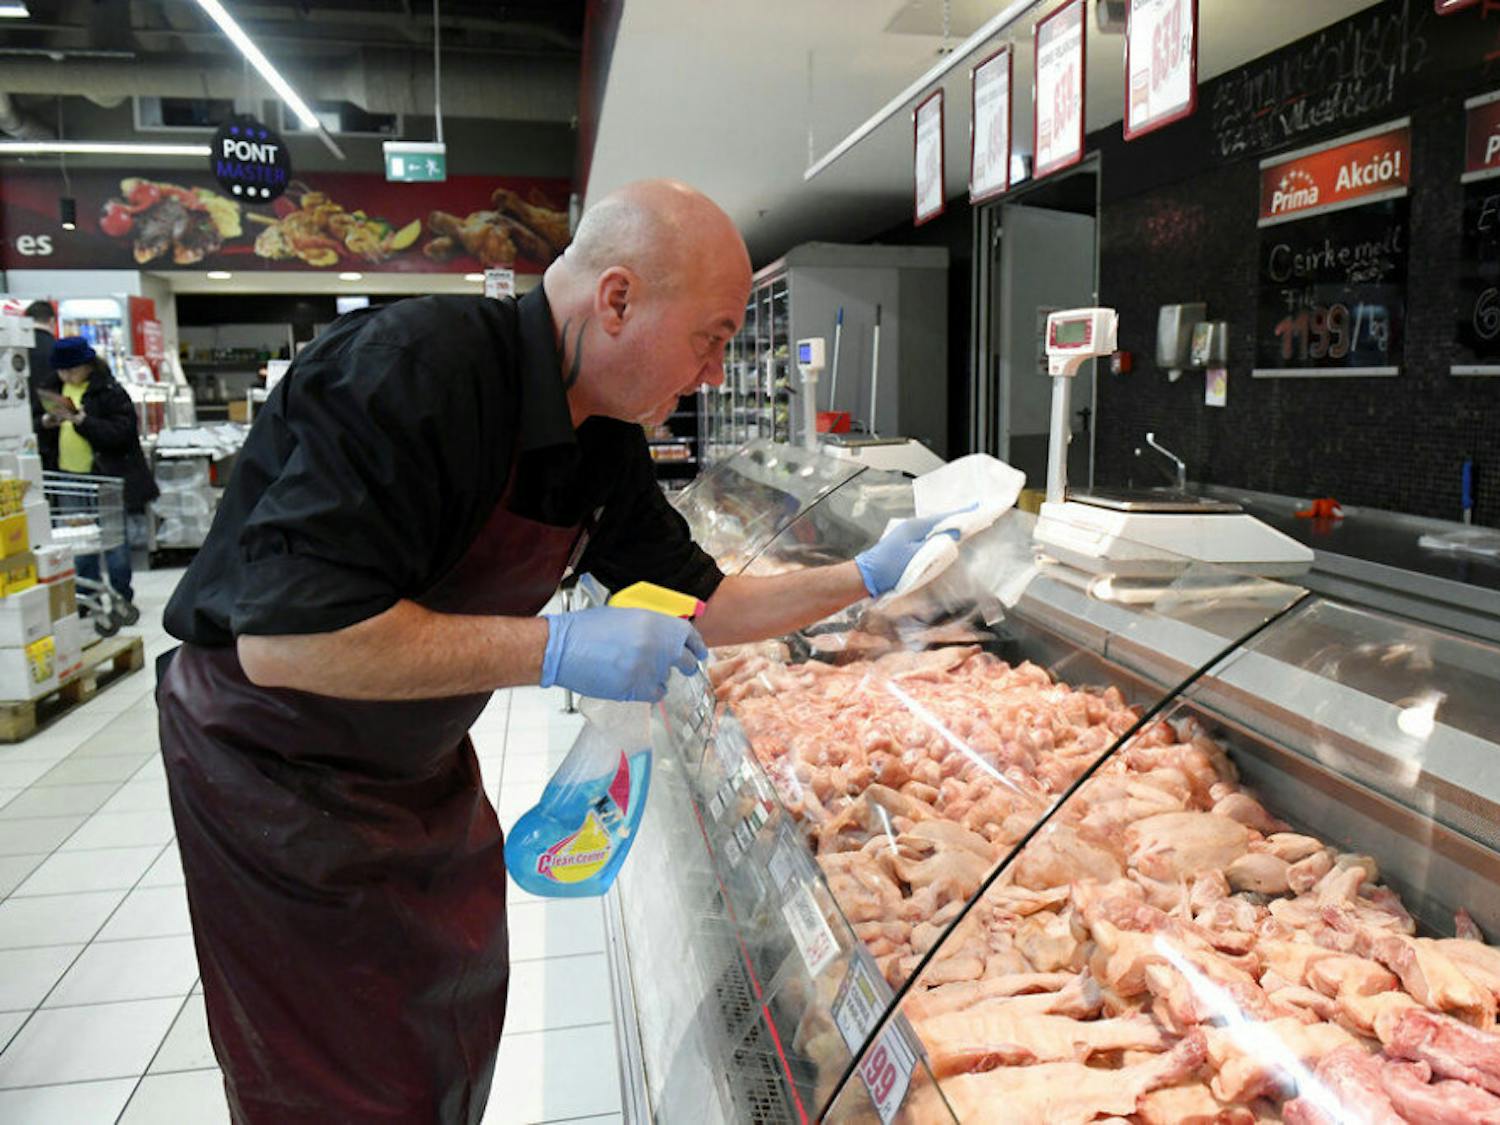 An employee disinfects the glass cover of a butcher counter to prevent the spread of the novel coronavirus in a food store in Budapest, Hungary, Wednesday, March 11, 2020. For most people, the new coronavirus causes only mild or moderate symptoms, such as fever and cough. For some, especially older adults and people with existing health problems, it can cause more severe illness, including pneumonia. (Tamas Kovacs/MTI via AP)